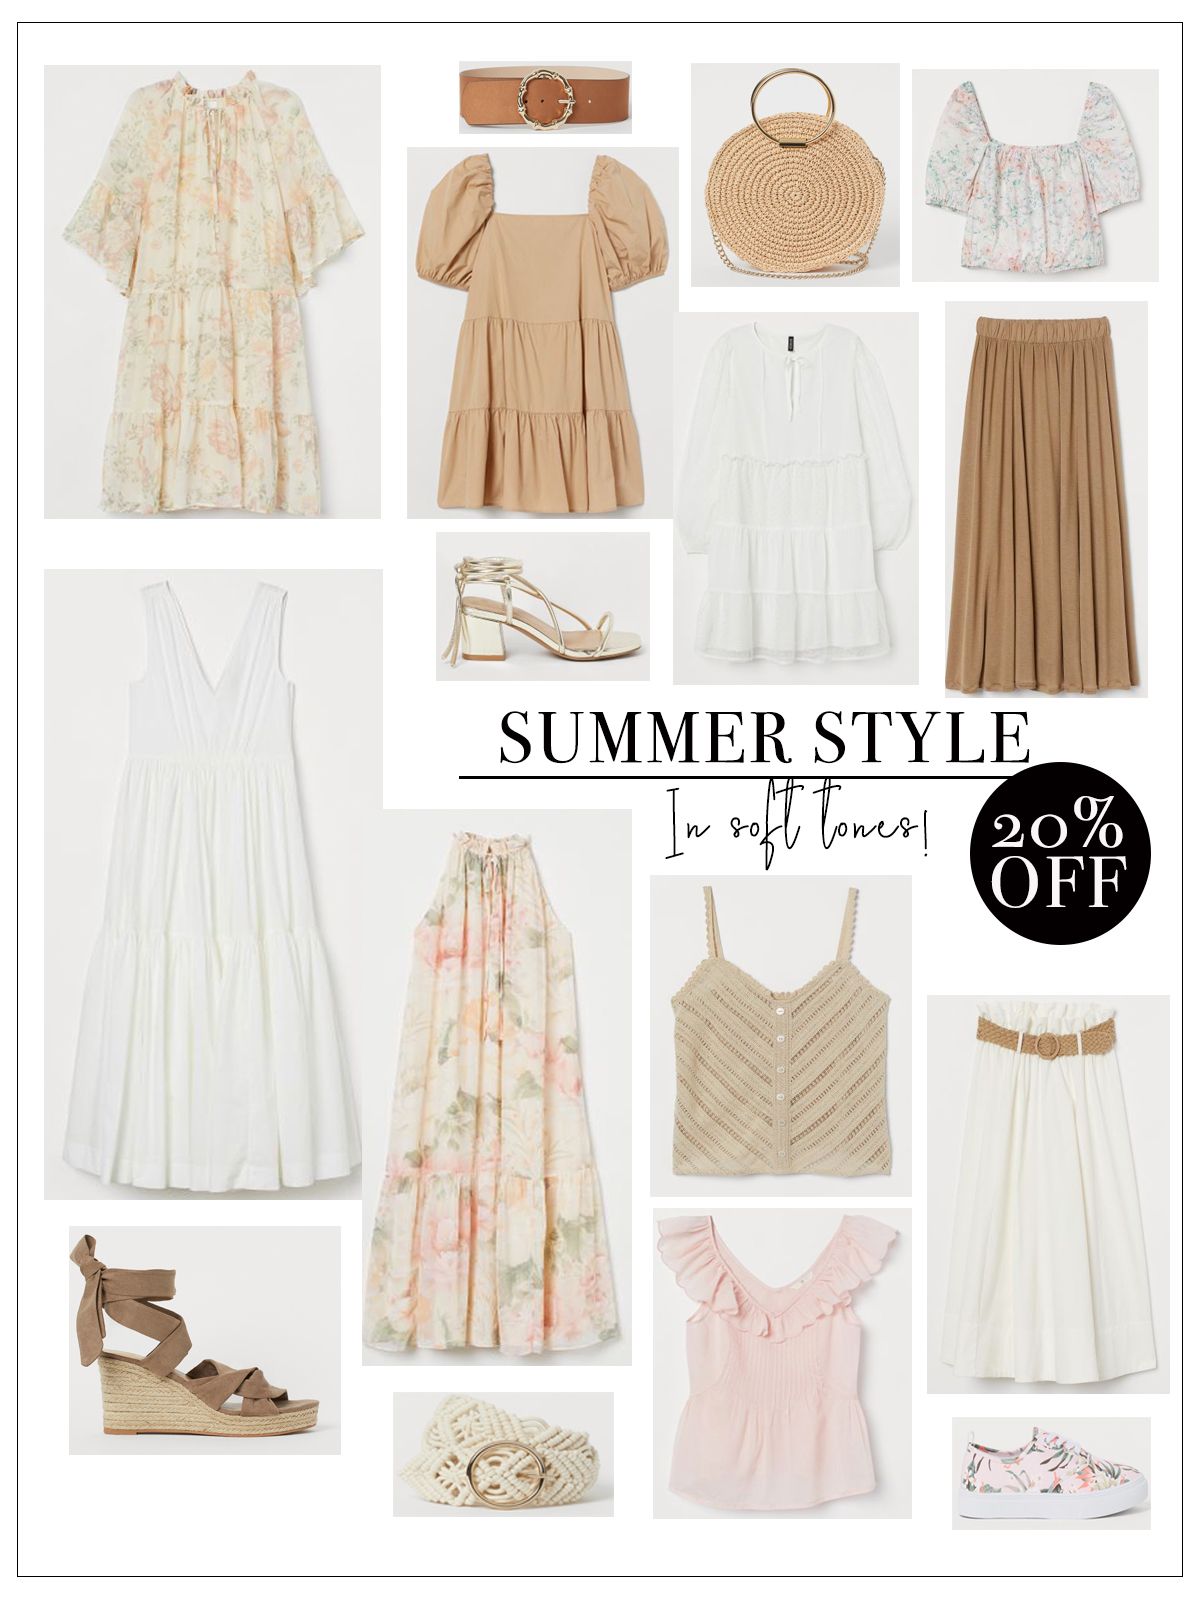 H&M SUMMER STYLE-20% OFF SITEWIDE